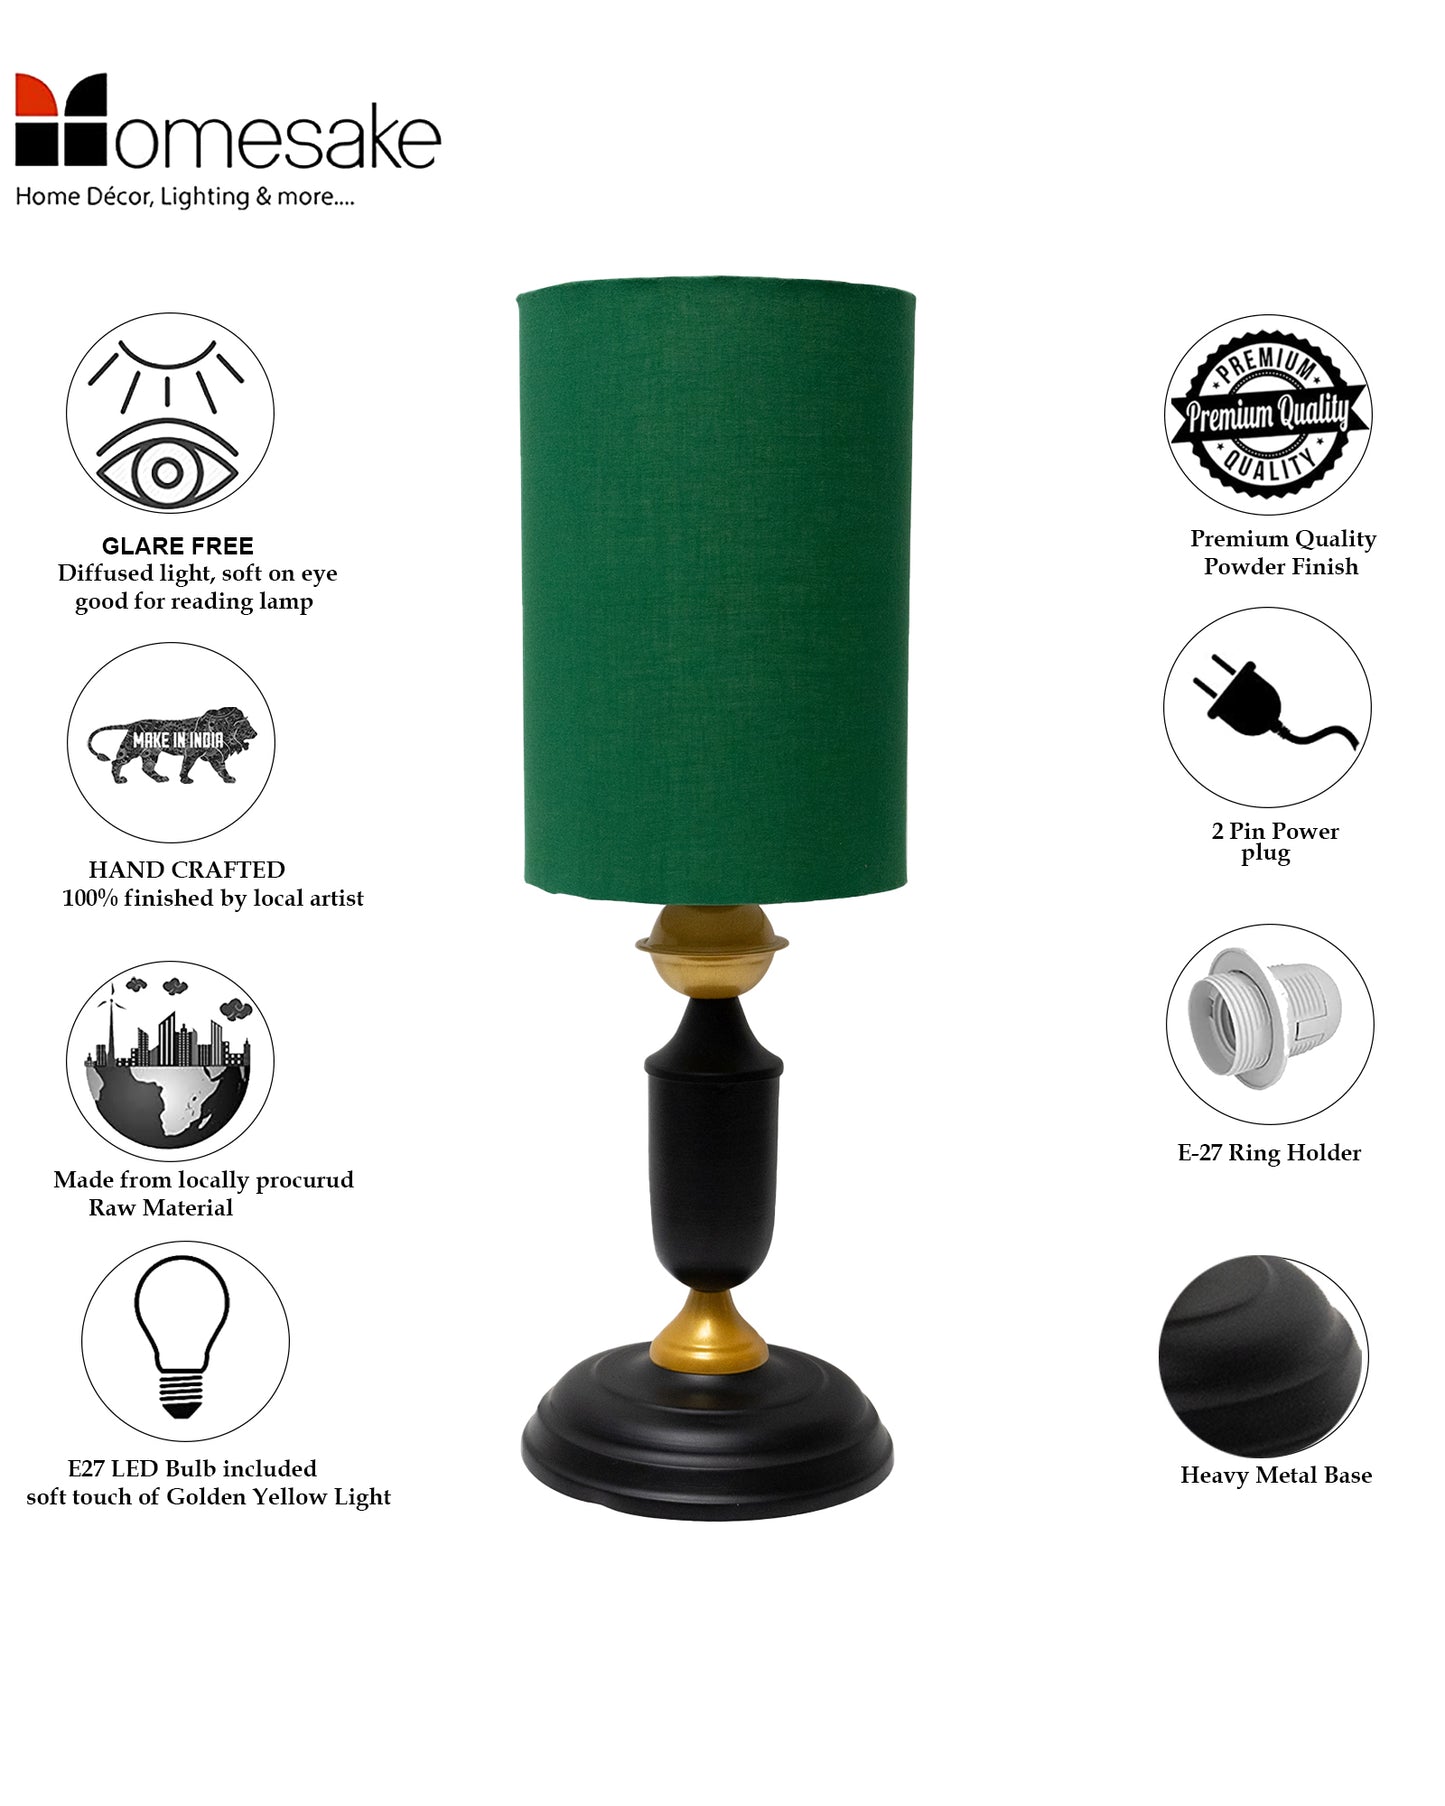 Murphy Black Table Lamp with Shade, LED bulb included